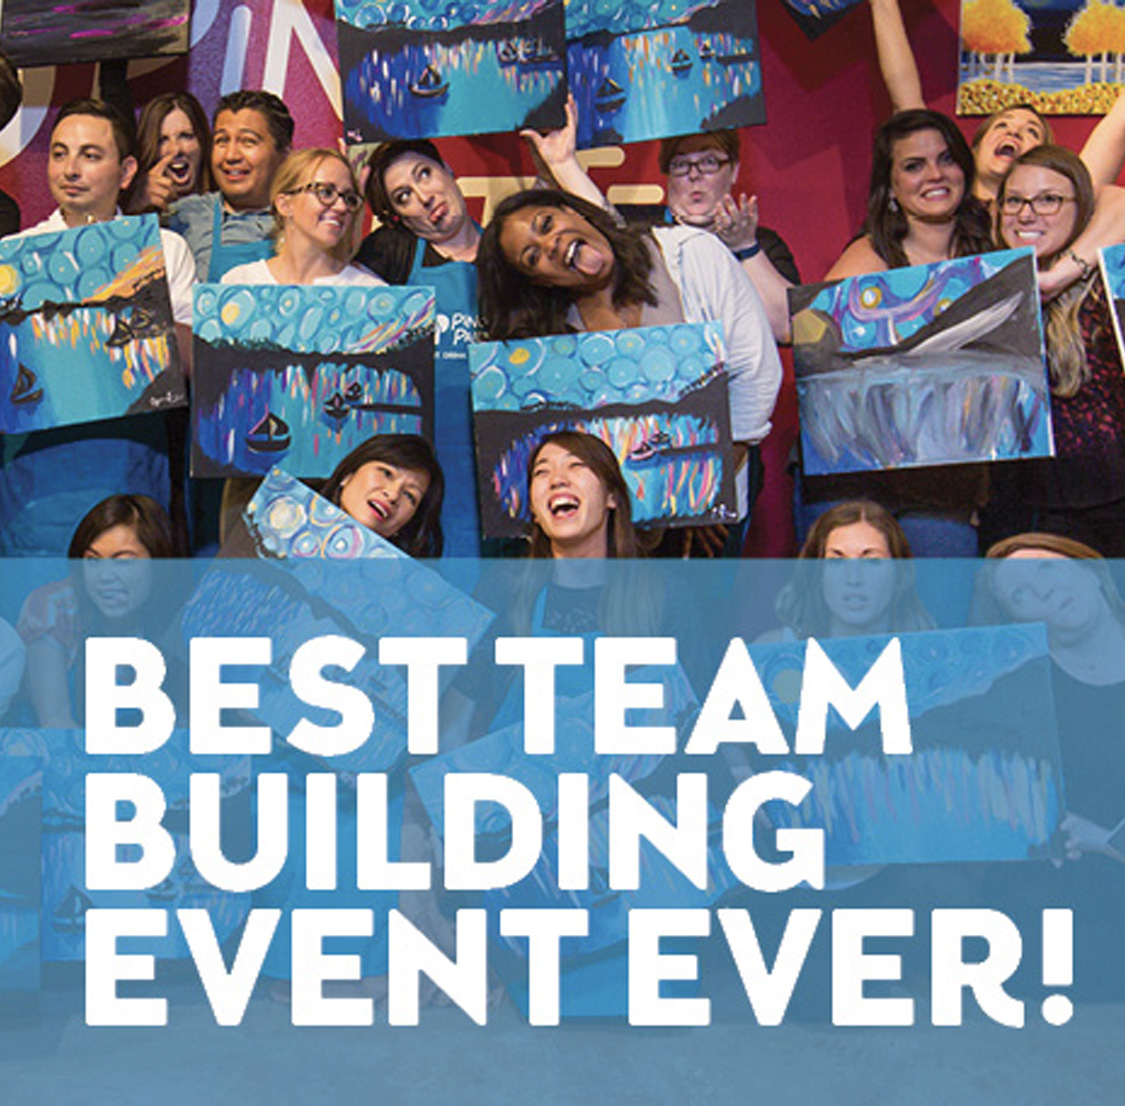 BOOKING A TEAM BUILDING EVENT WITH US